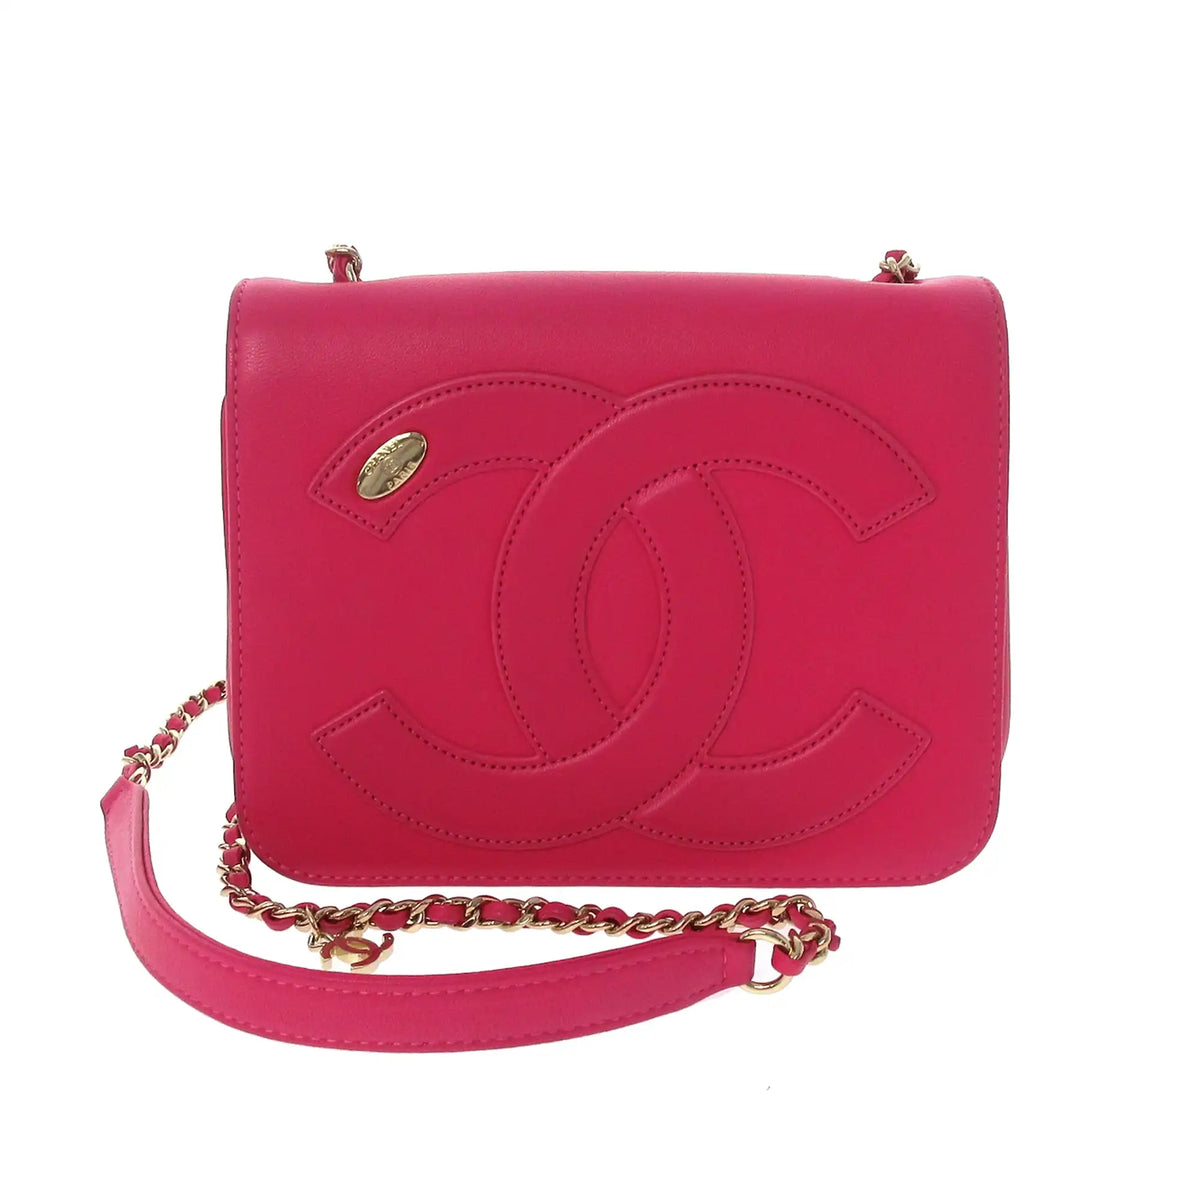 Chanel Red Leather CC Mania Waist Bag